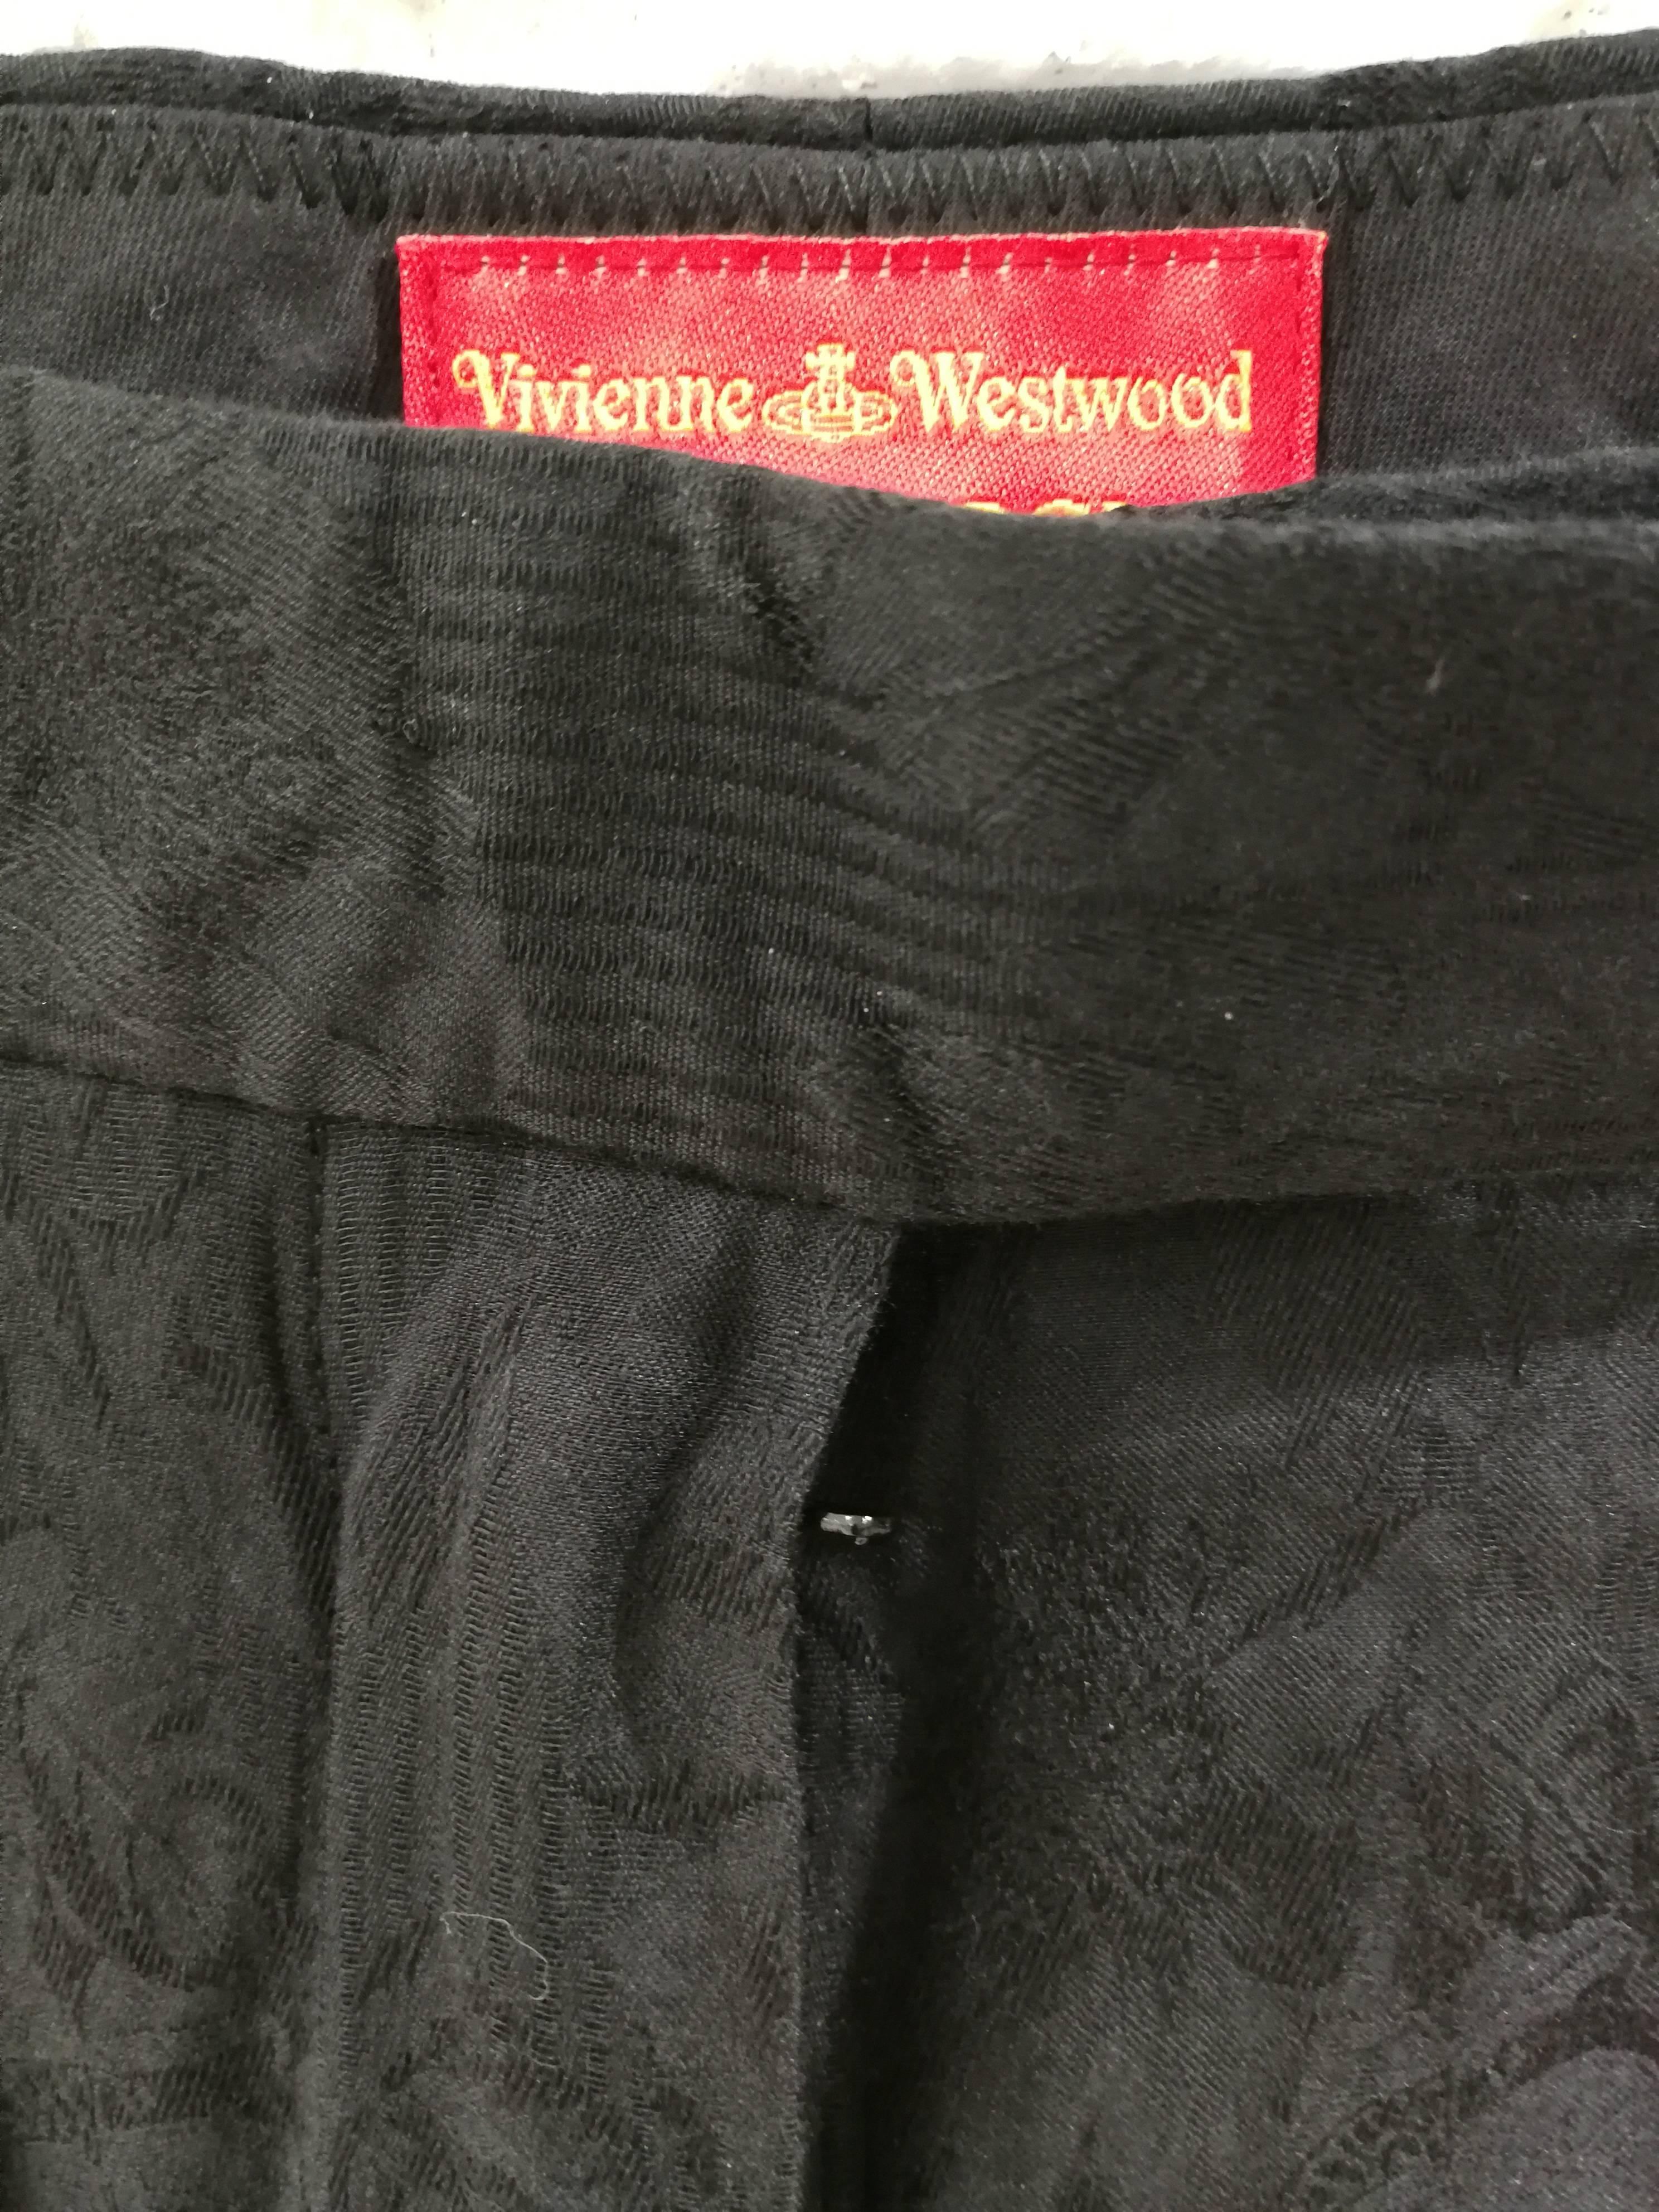 Vivienne Westwood black Trousers 

totally made in italy in size 44

Composition: cotton and silk

total lenght: 110 cm
Waist: 84 cm